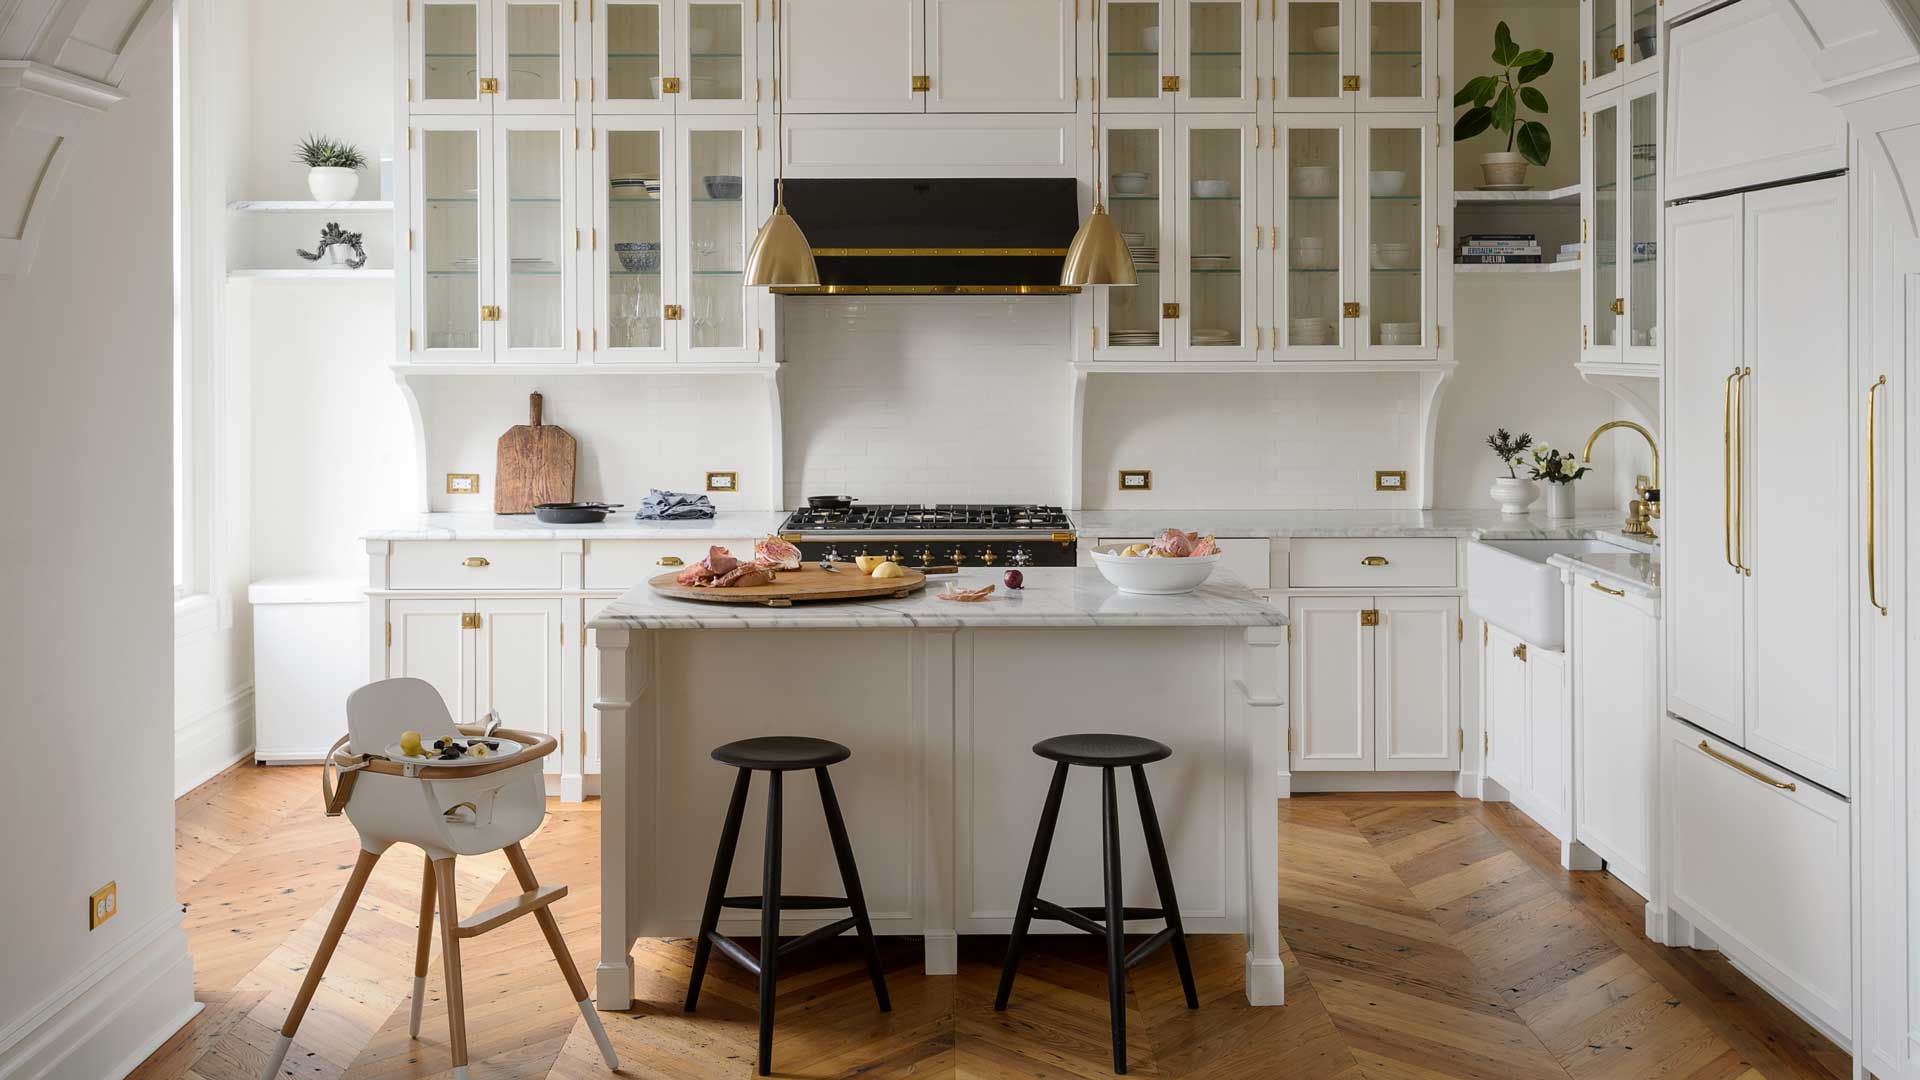 20 kitchen island ideas – how to create a practical and stylish ...